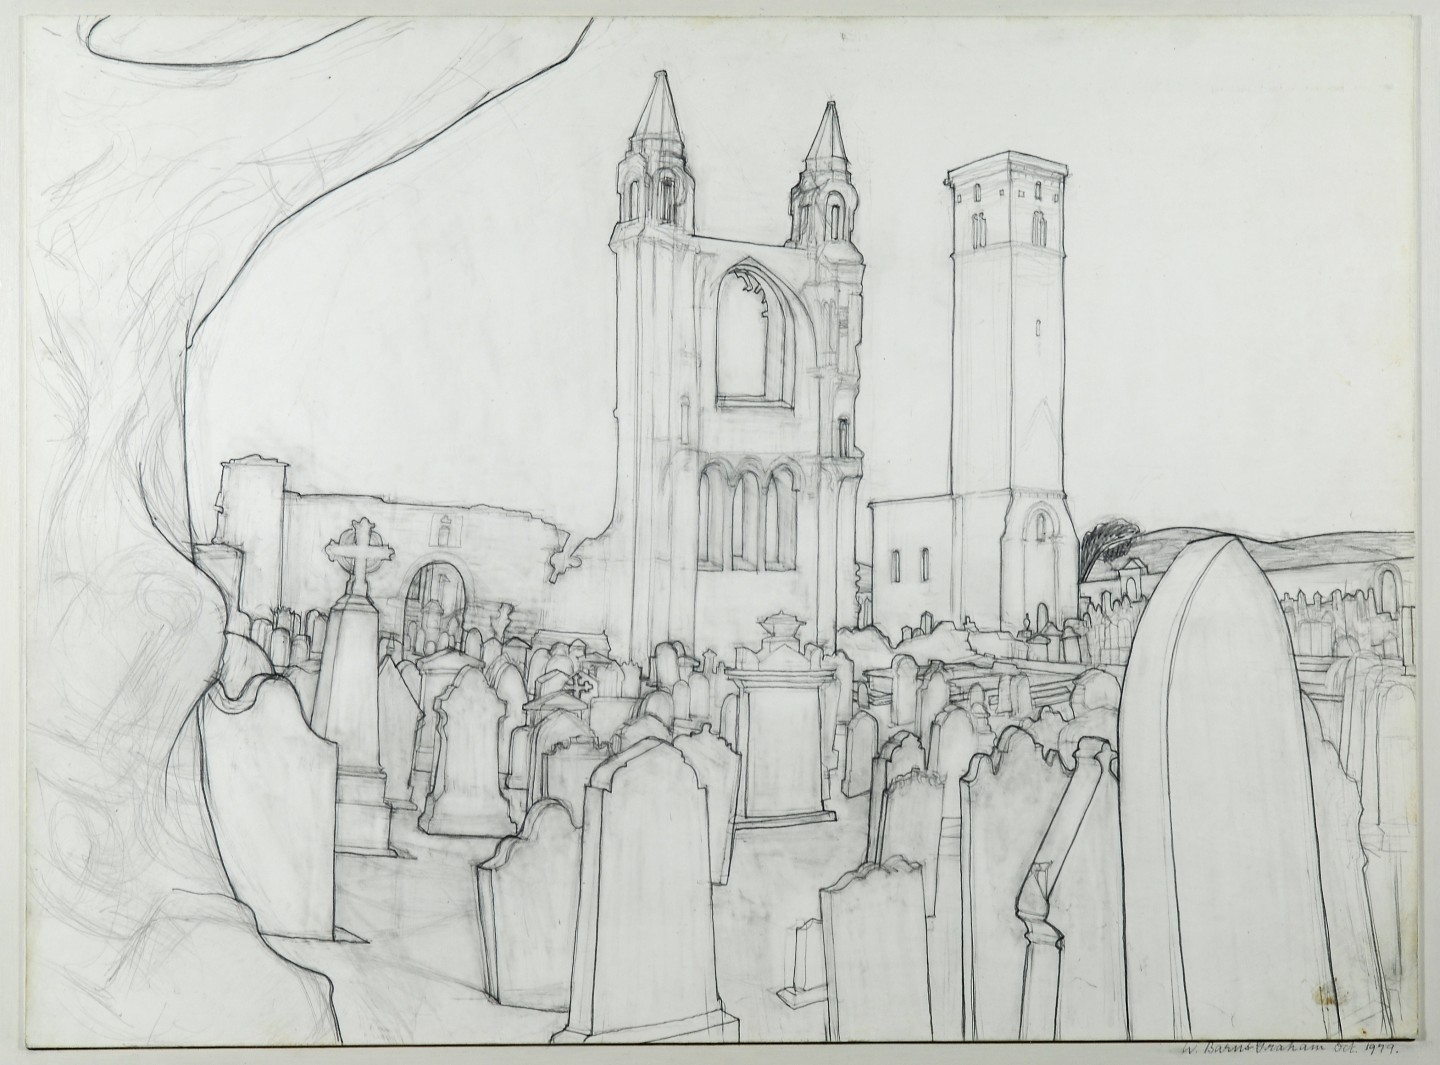 St Regulus, St Andrews, 1979, pencil and mixed media on card